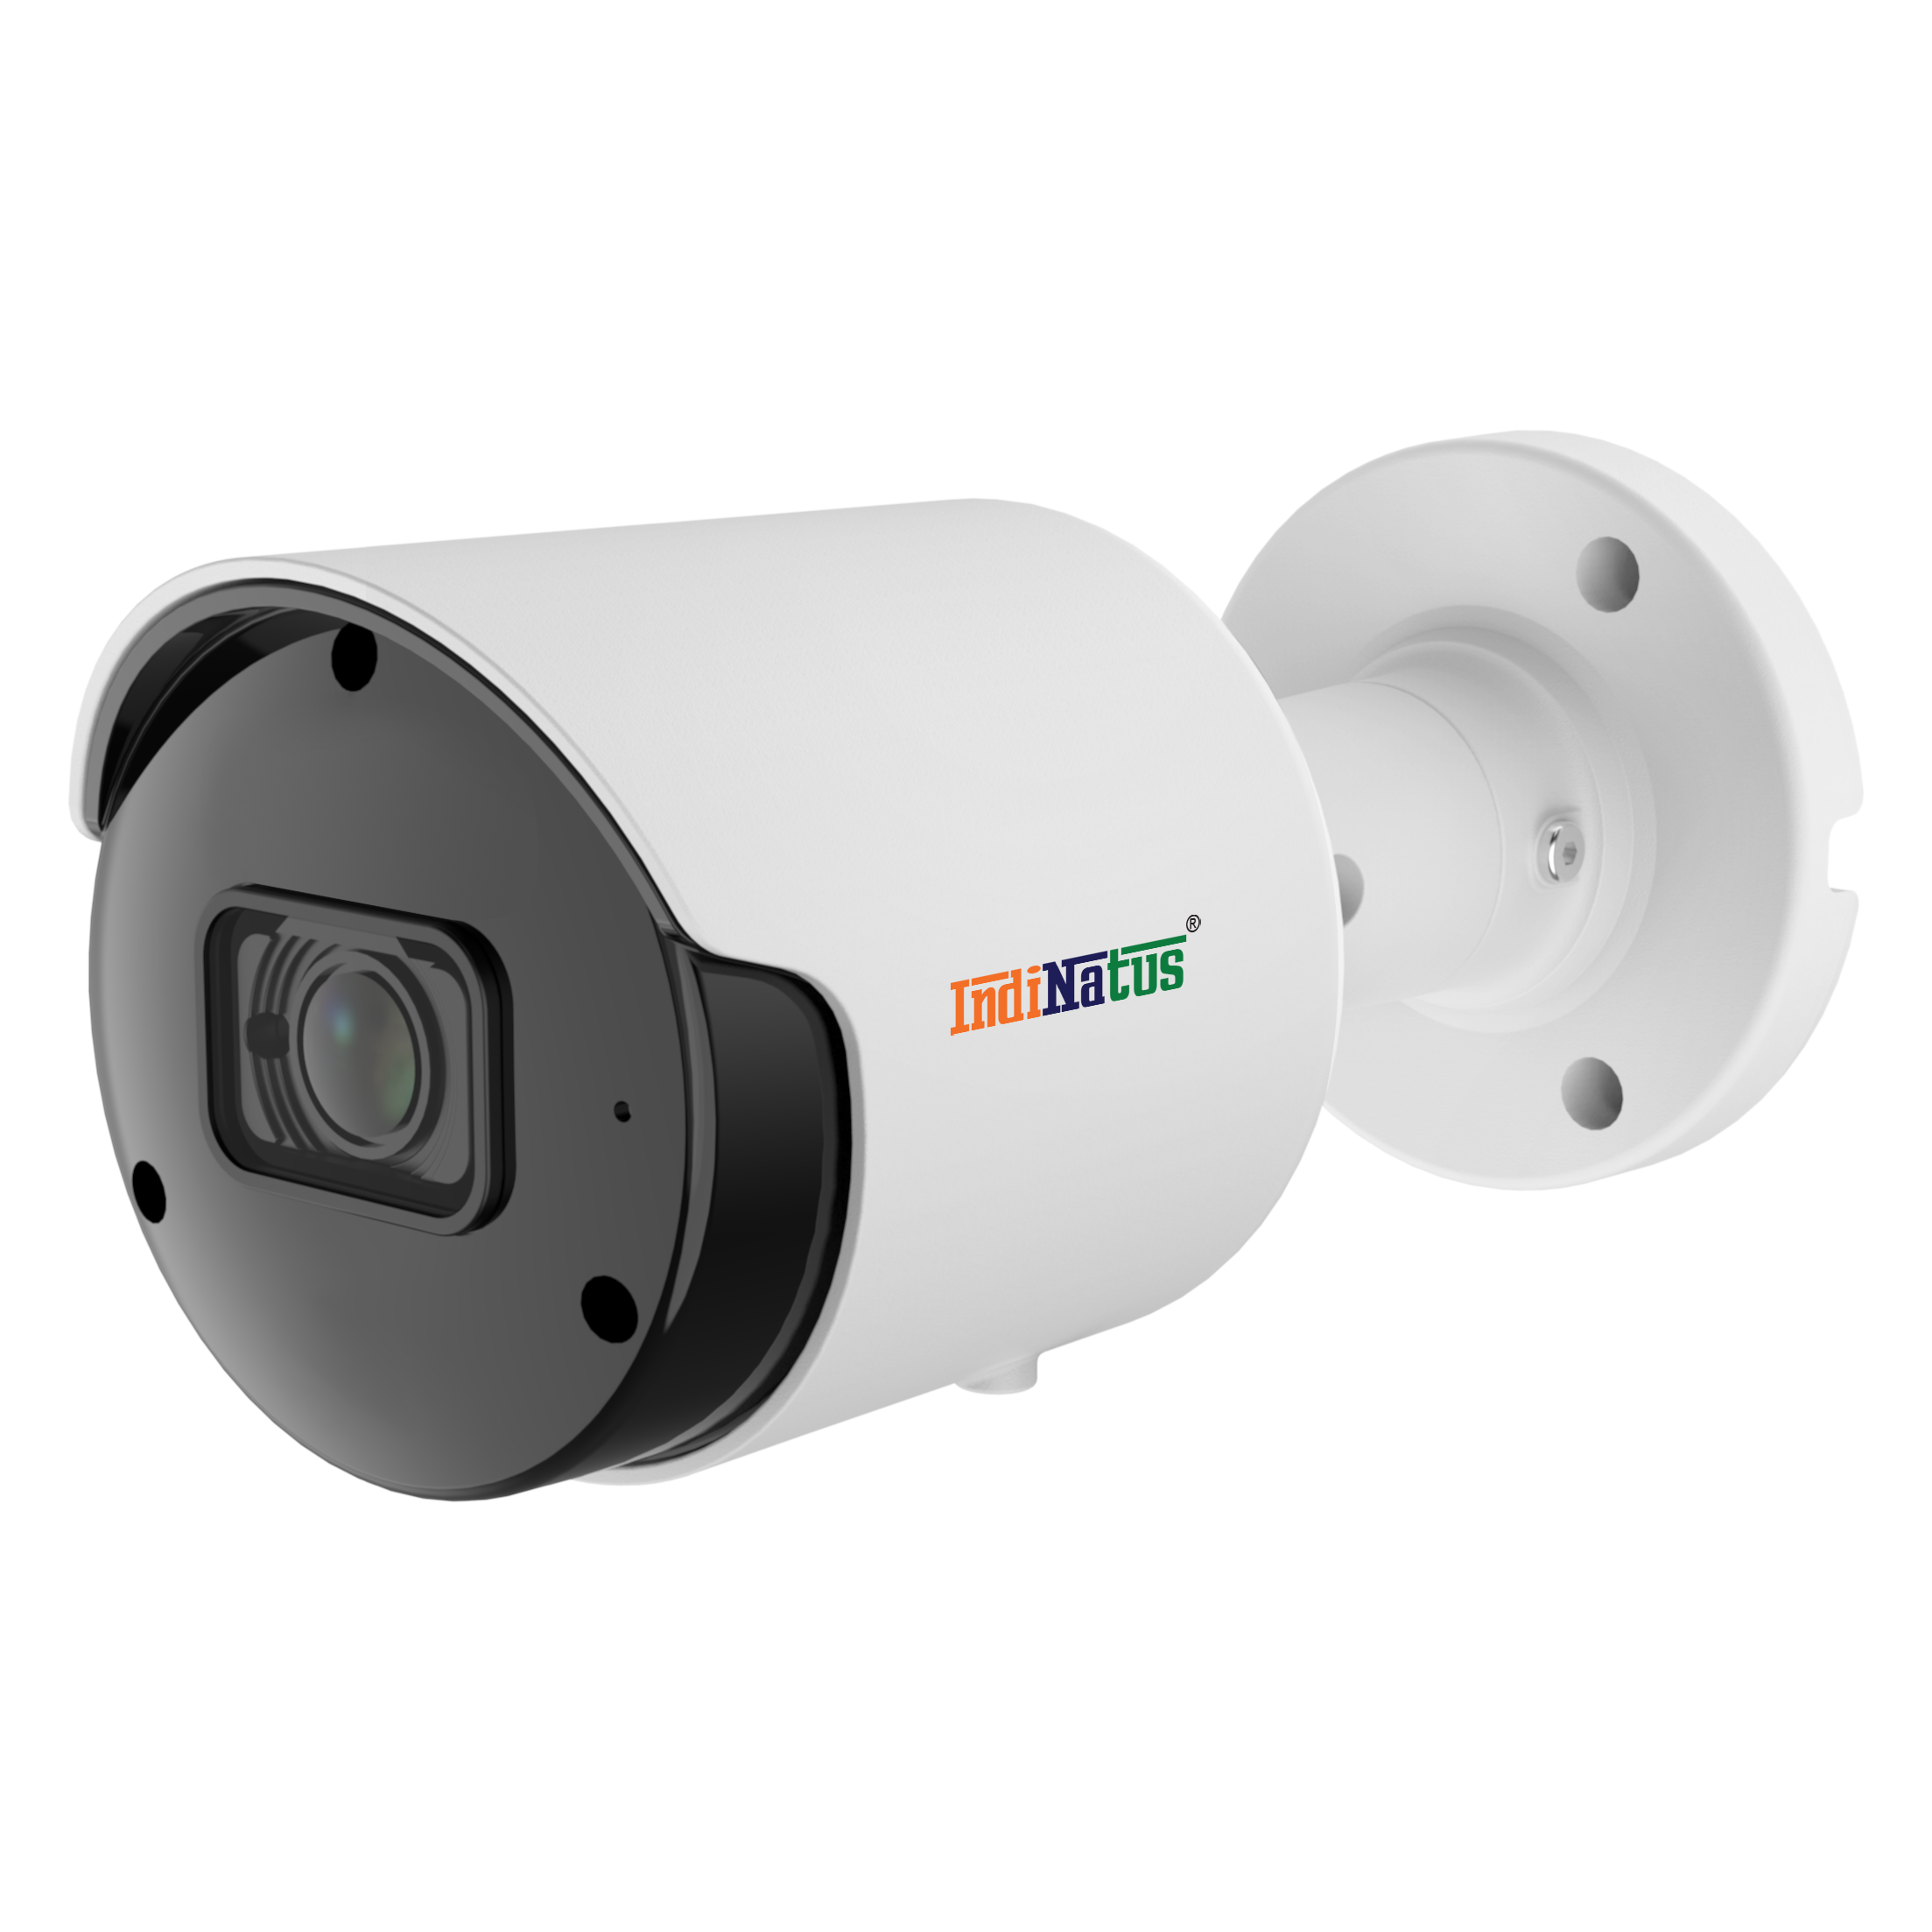  2-Megapixel IR & WDR, Outdoor Fixed IP Bullet Camera, IN-IPC3F22P-I5USD,  IndiNatus® India Private Limited - India Ka Apna Brand, Indian CCTV  Brand,  Make In India CCTV camera, Make in india cctv camera brand available on gem portal, IP Network Camera, Indian brand CCTV Camera      